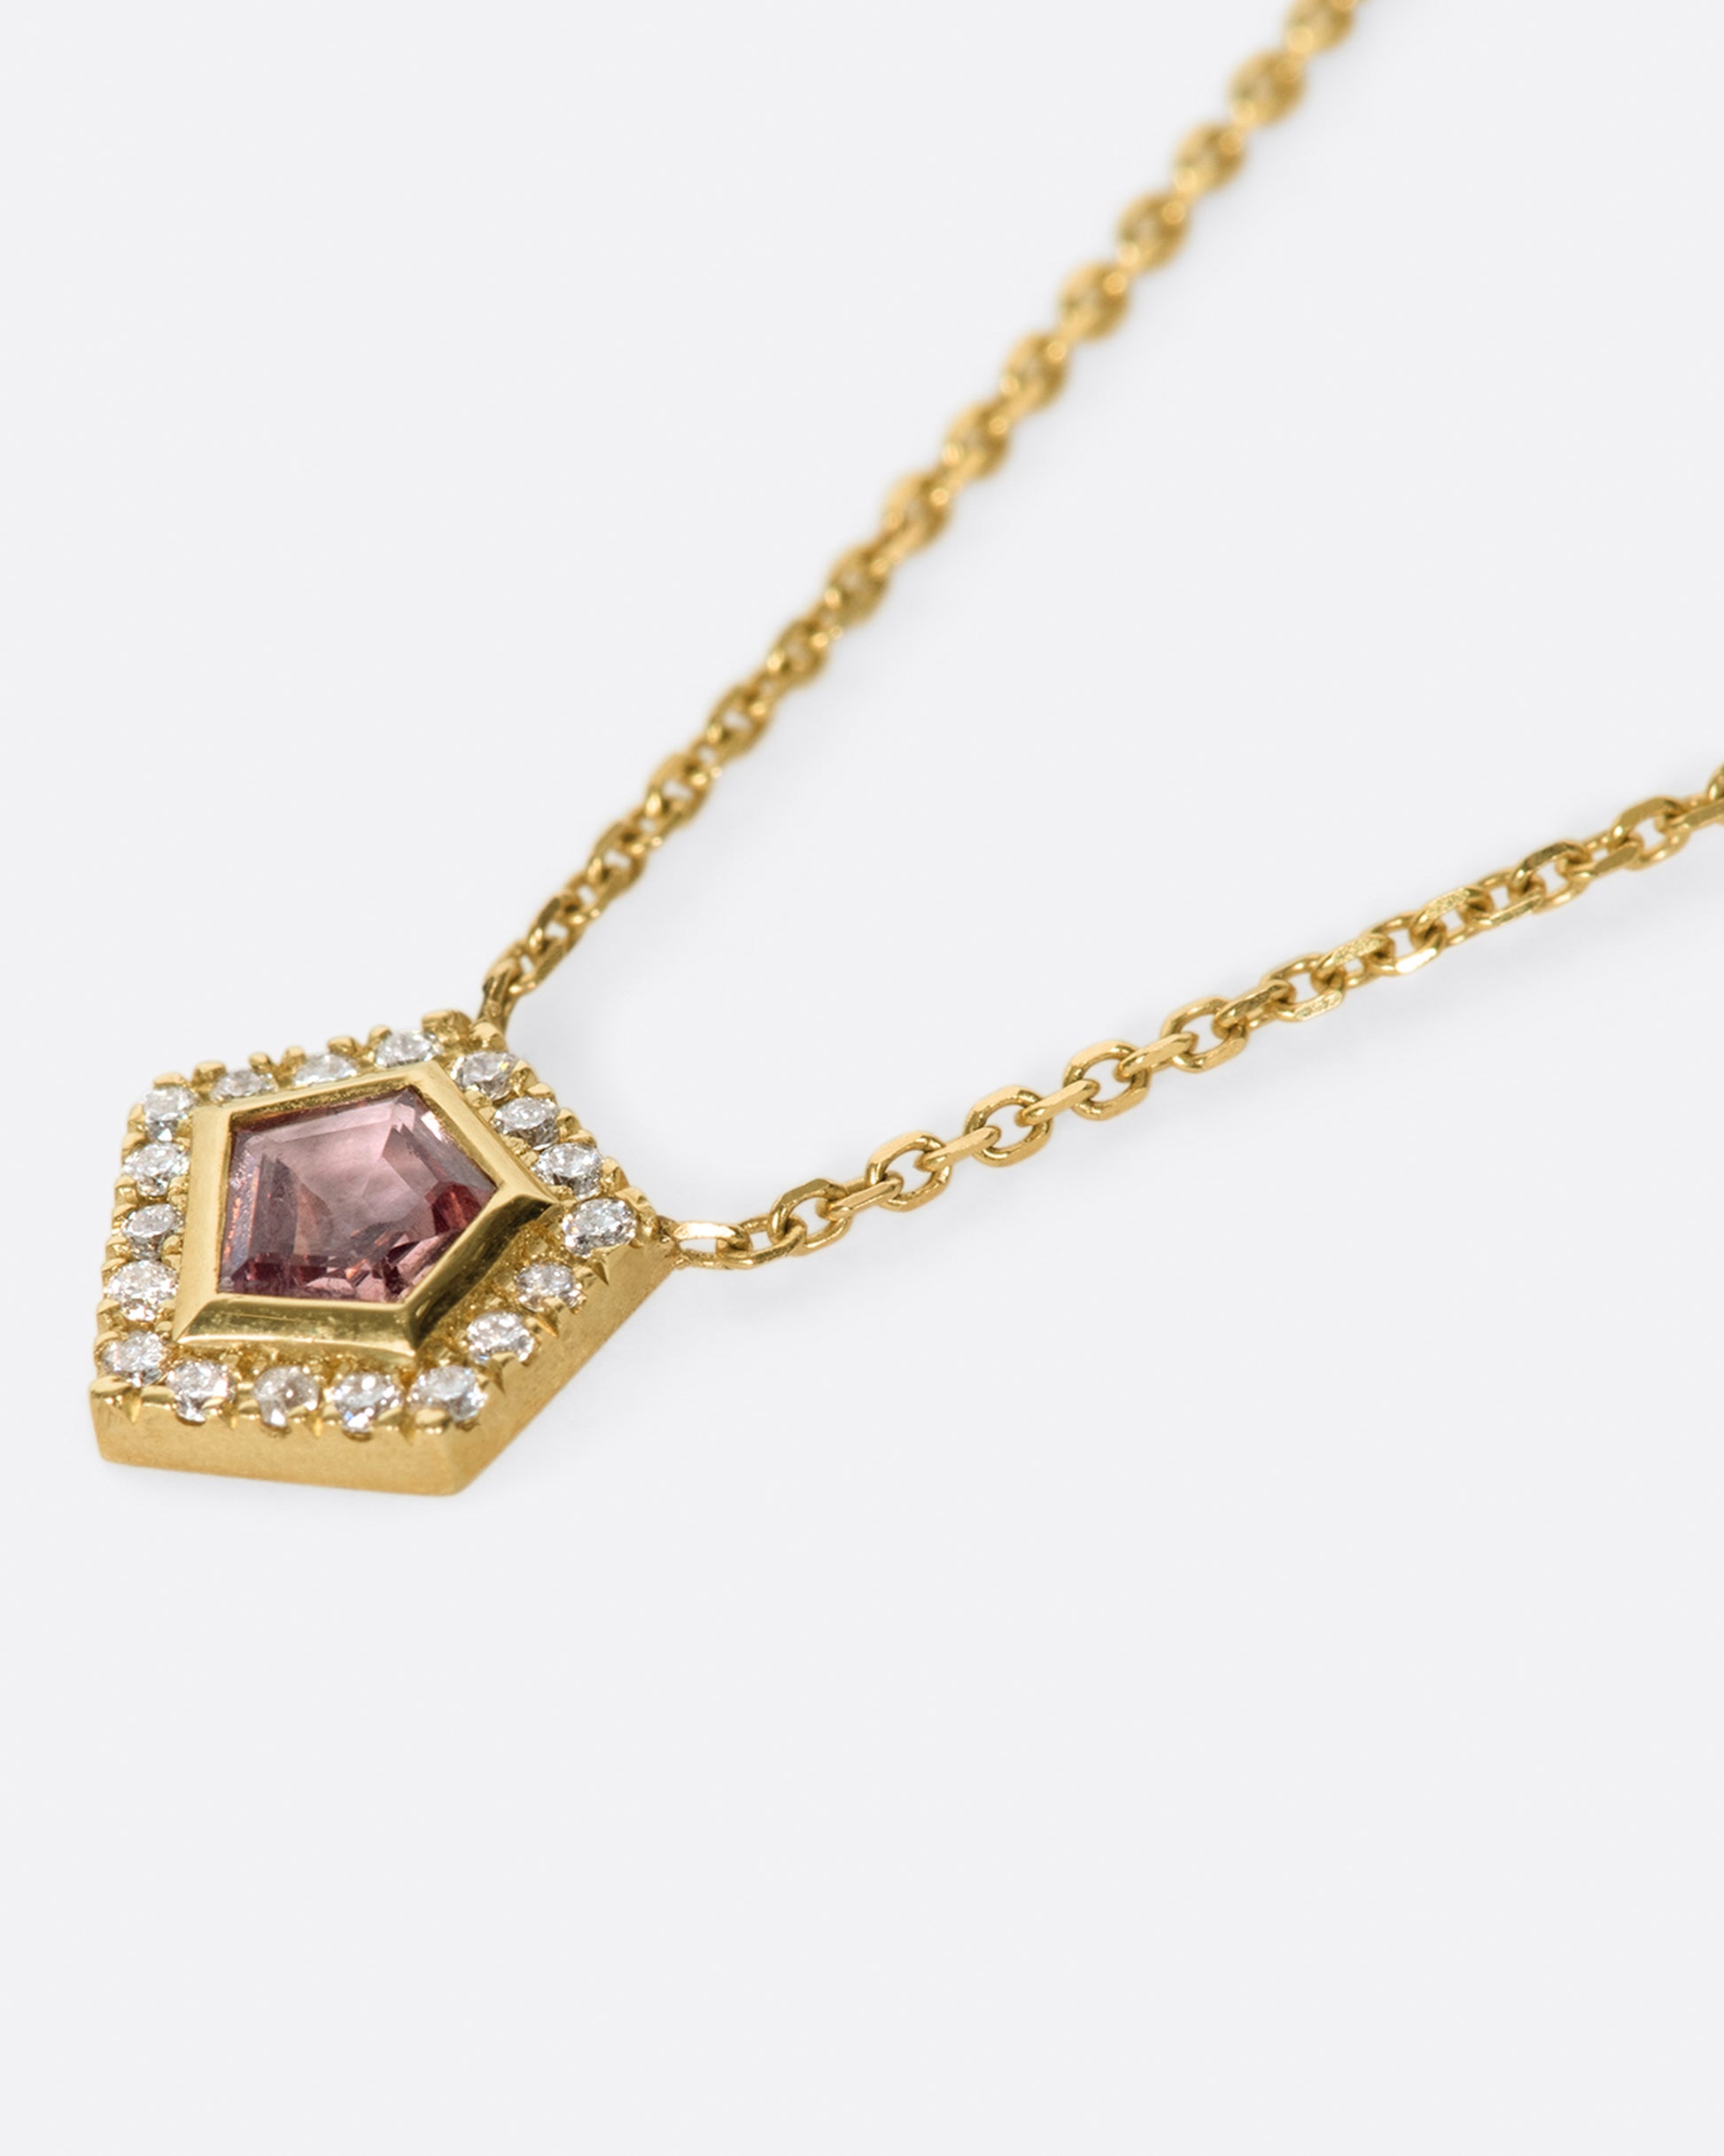 A shield shaped pink sapphire pendant necklace with a diamond halo, shown from the side.